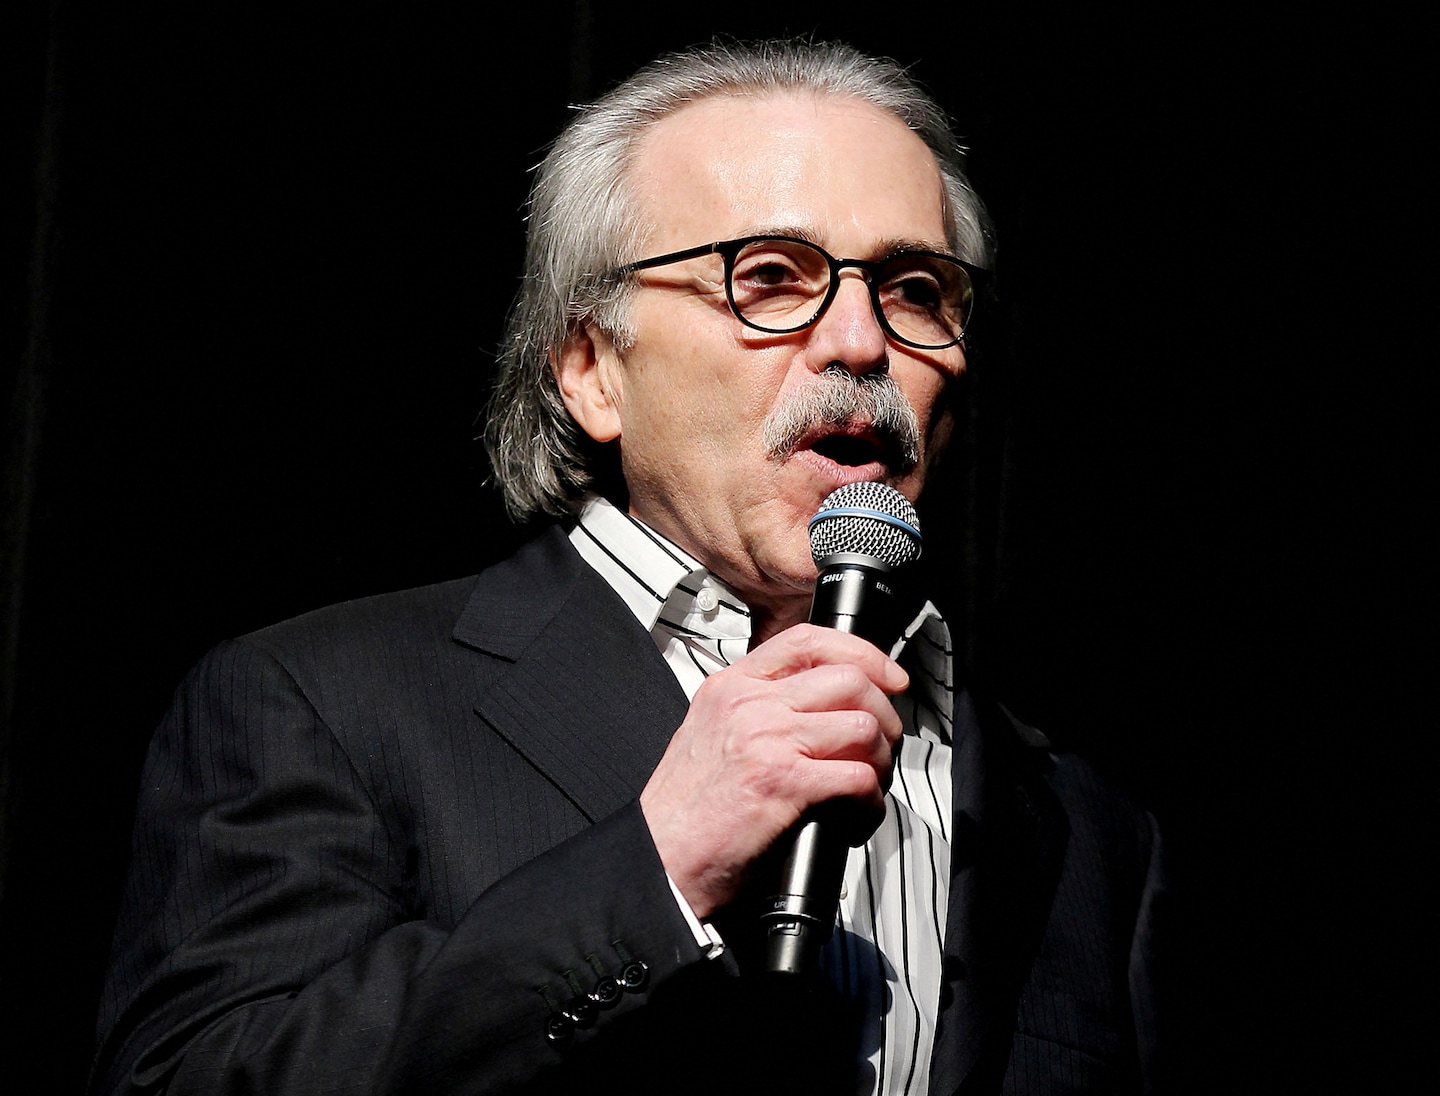 Meet David Pecker, ex-tabloid publisher and first witness against Trump